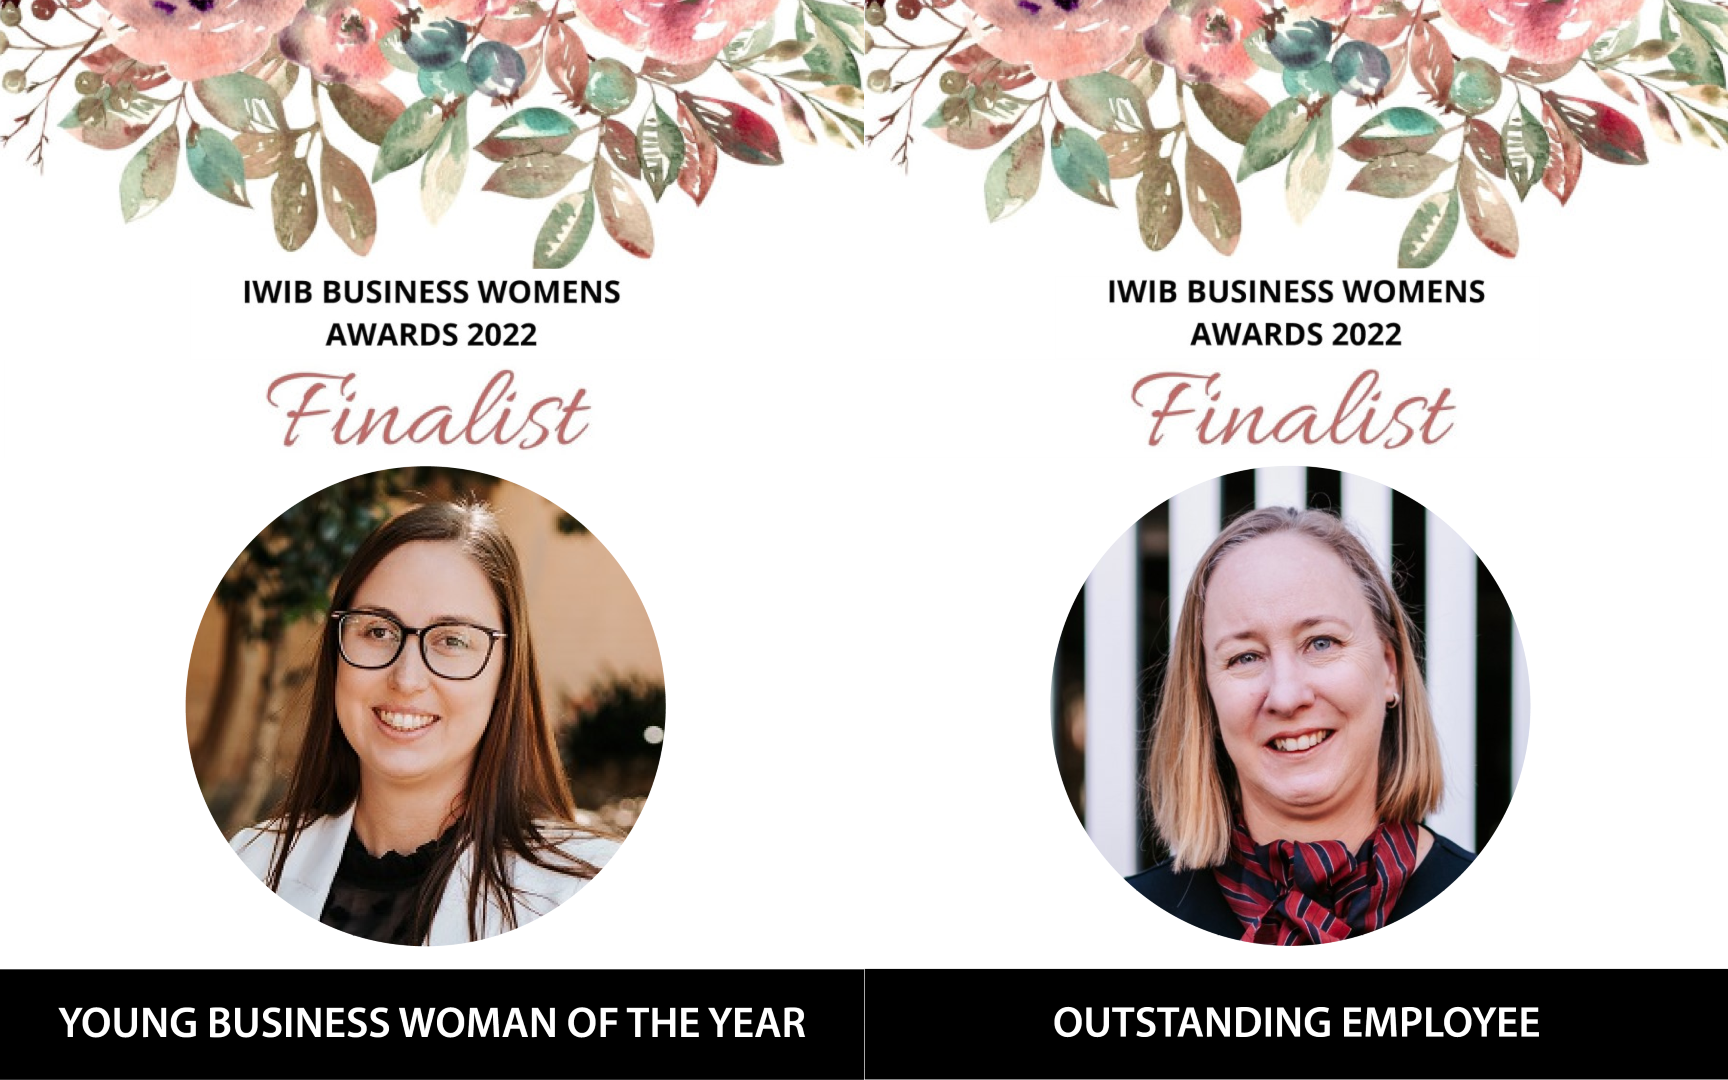 MMJ recognised in two categories at this year's Illawarra Women in Business Awards